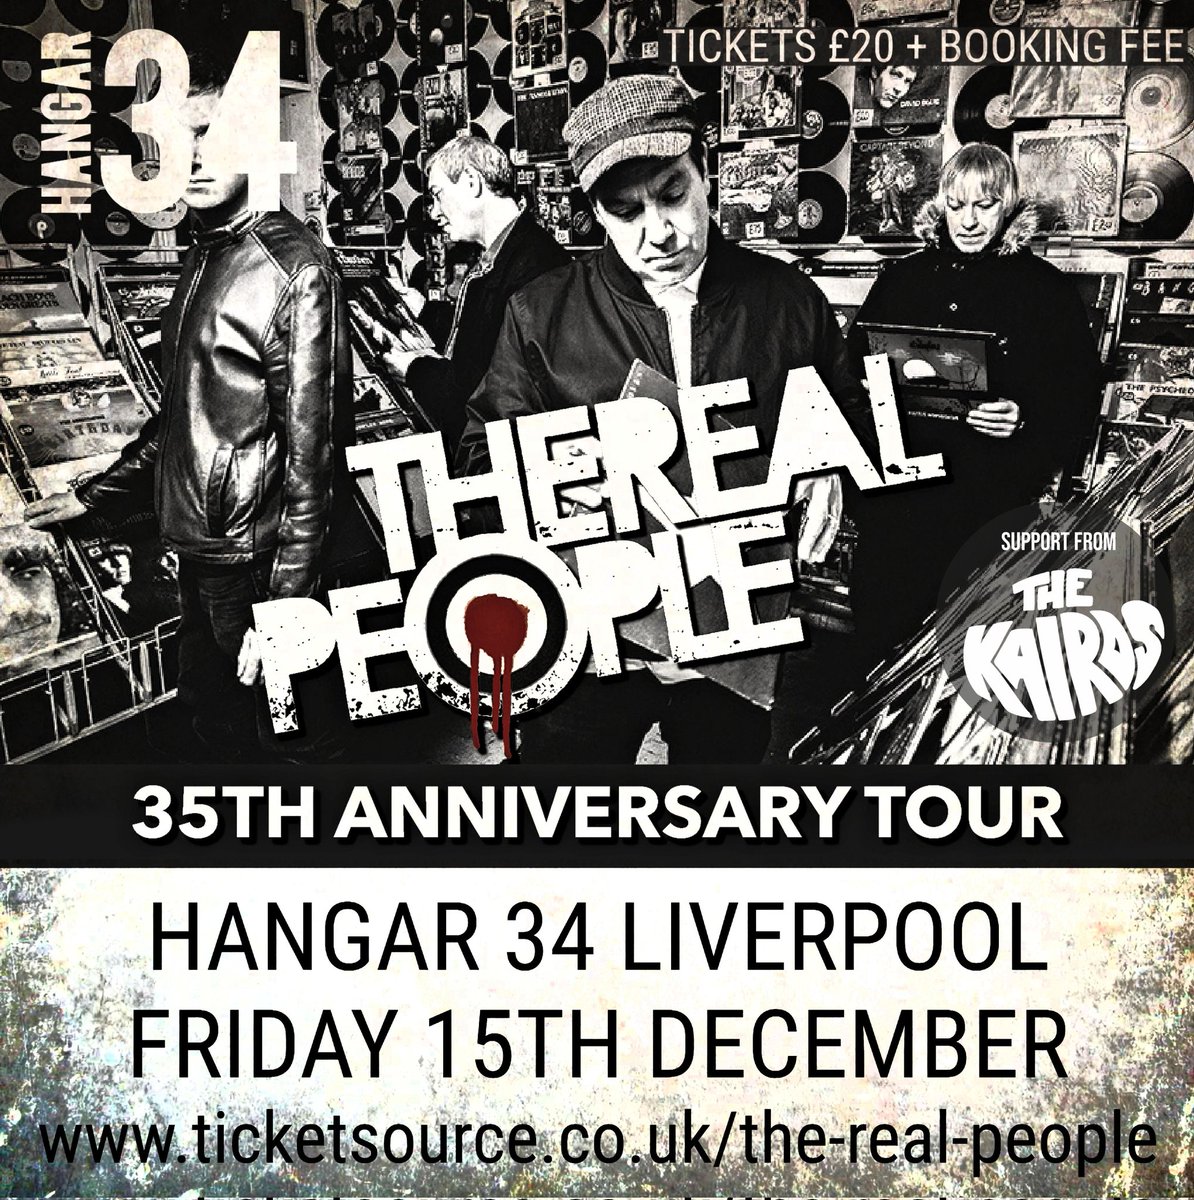 #TheRealPeople #35thAnniversary Friday 15th December @Hangar34Liver #LIVERPOOL Support @TheKairos1 Limited Tickets Available ticketsource.co.uk/whats-on/liver…